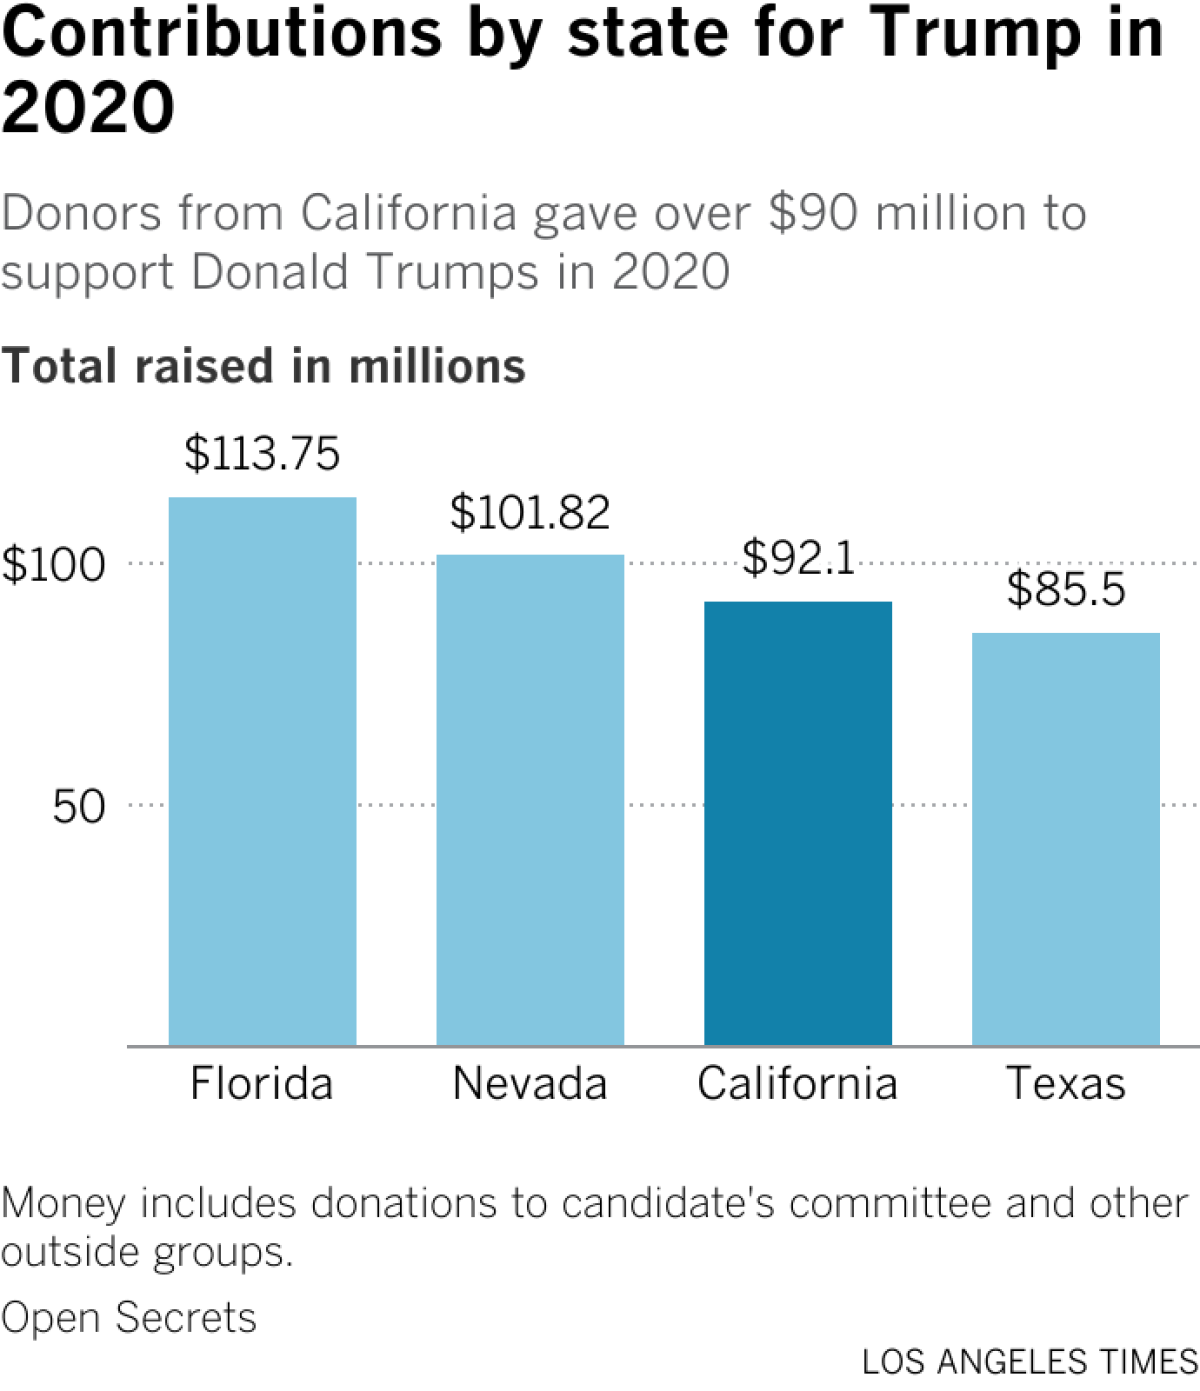 Total money raised by Florida, Nevada, California and Texas